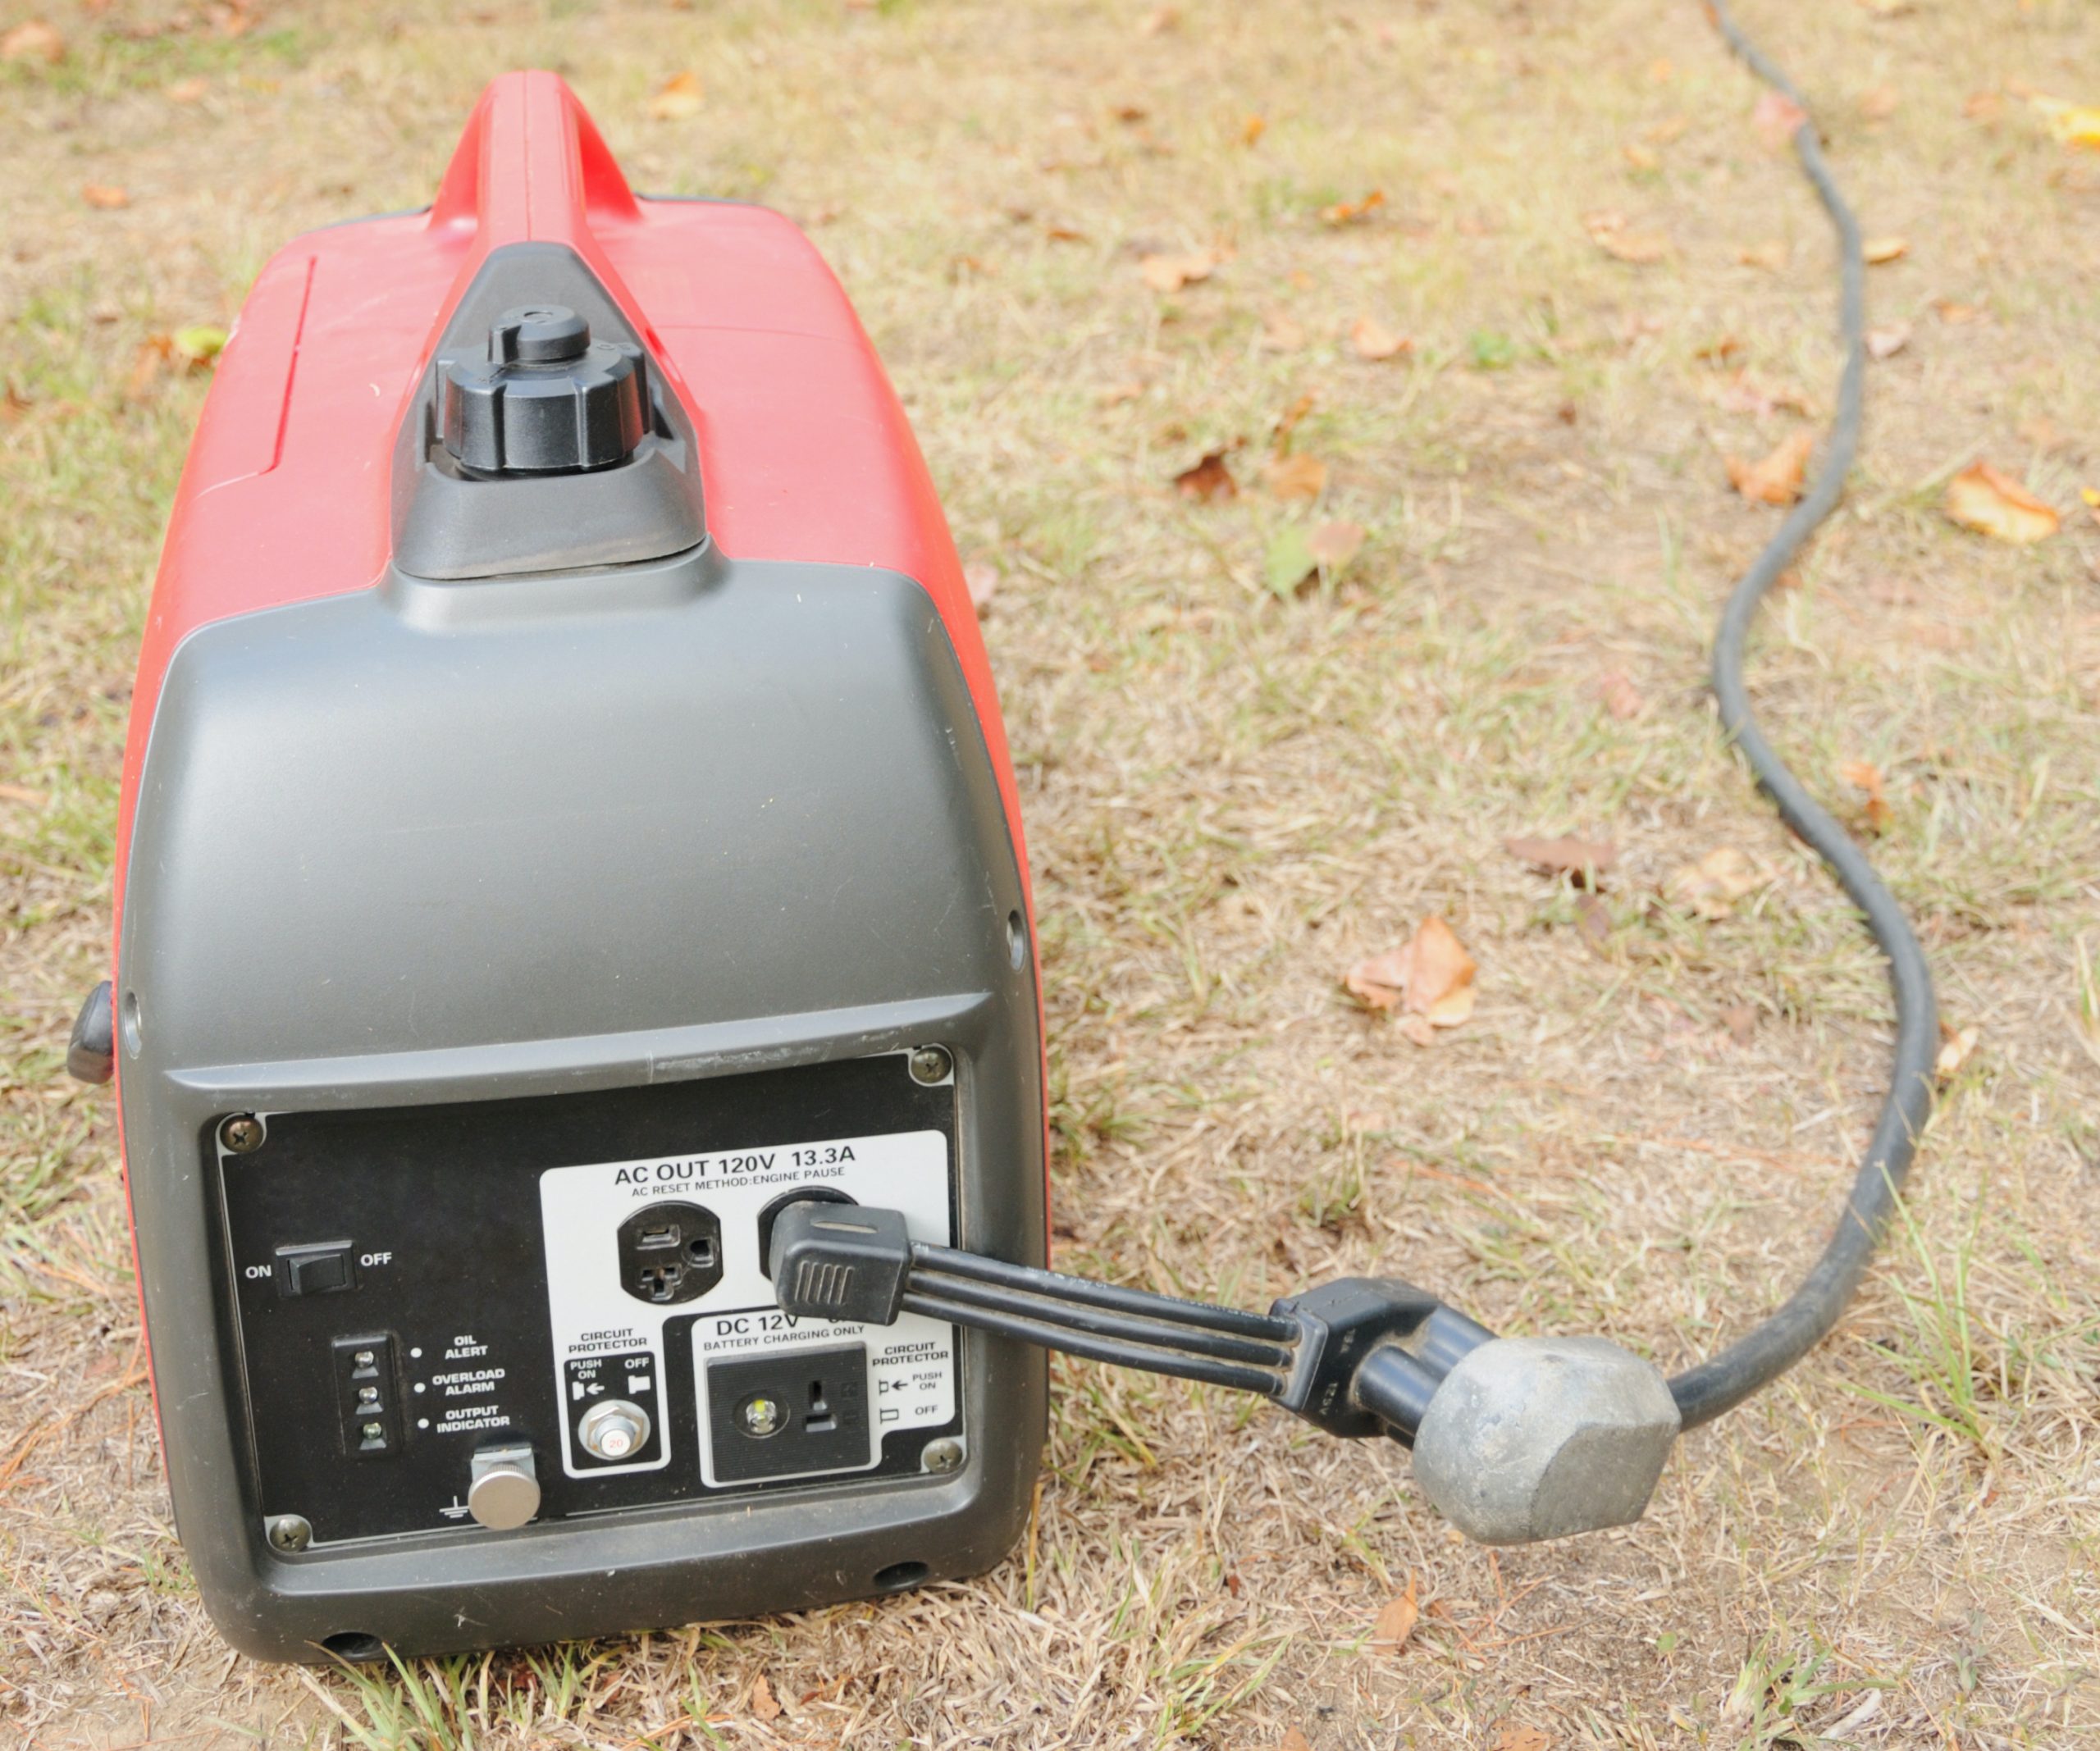 portable generator used while camping